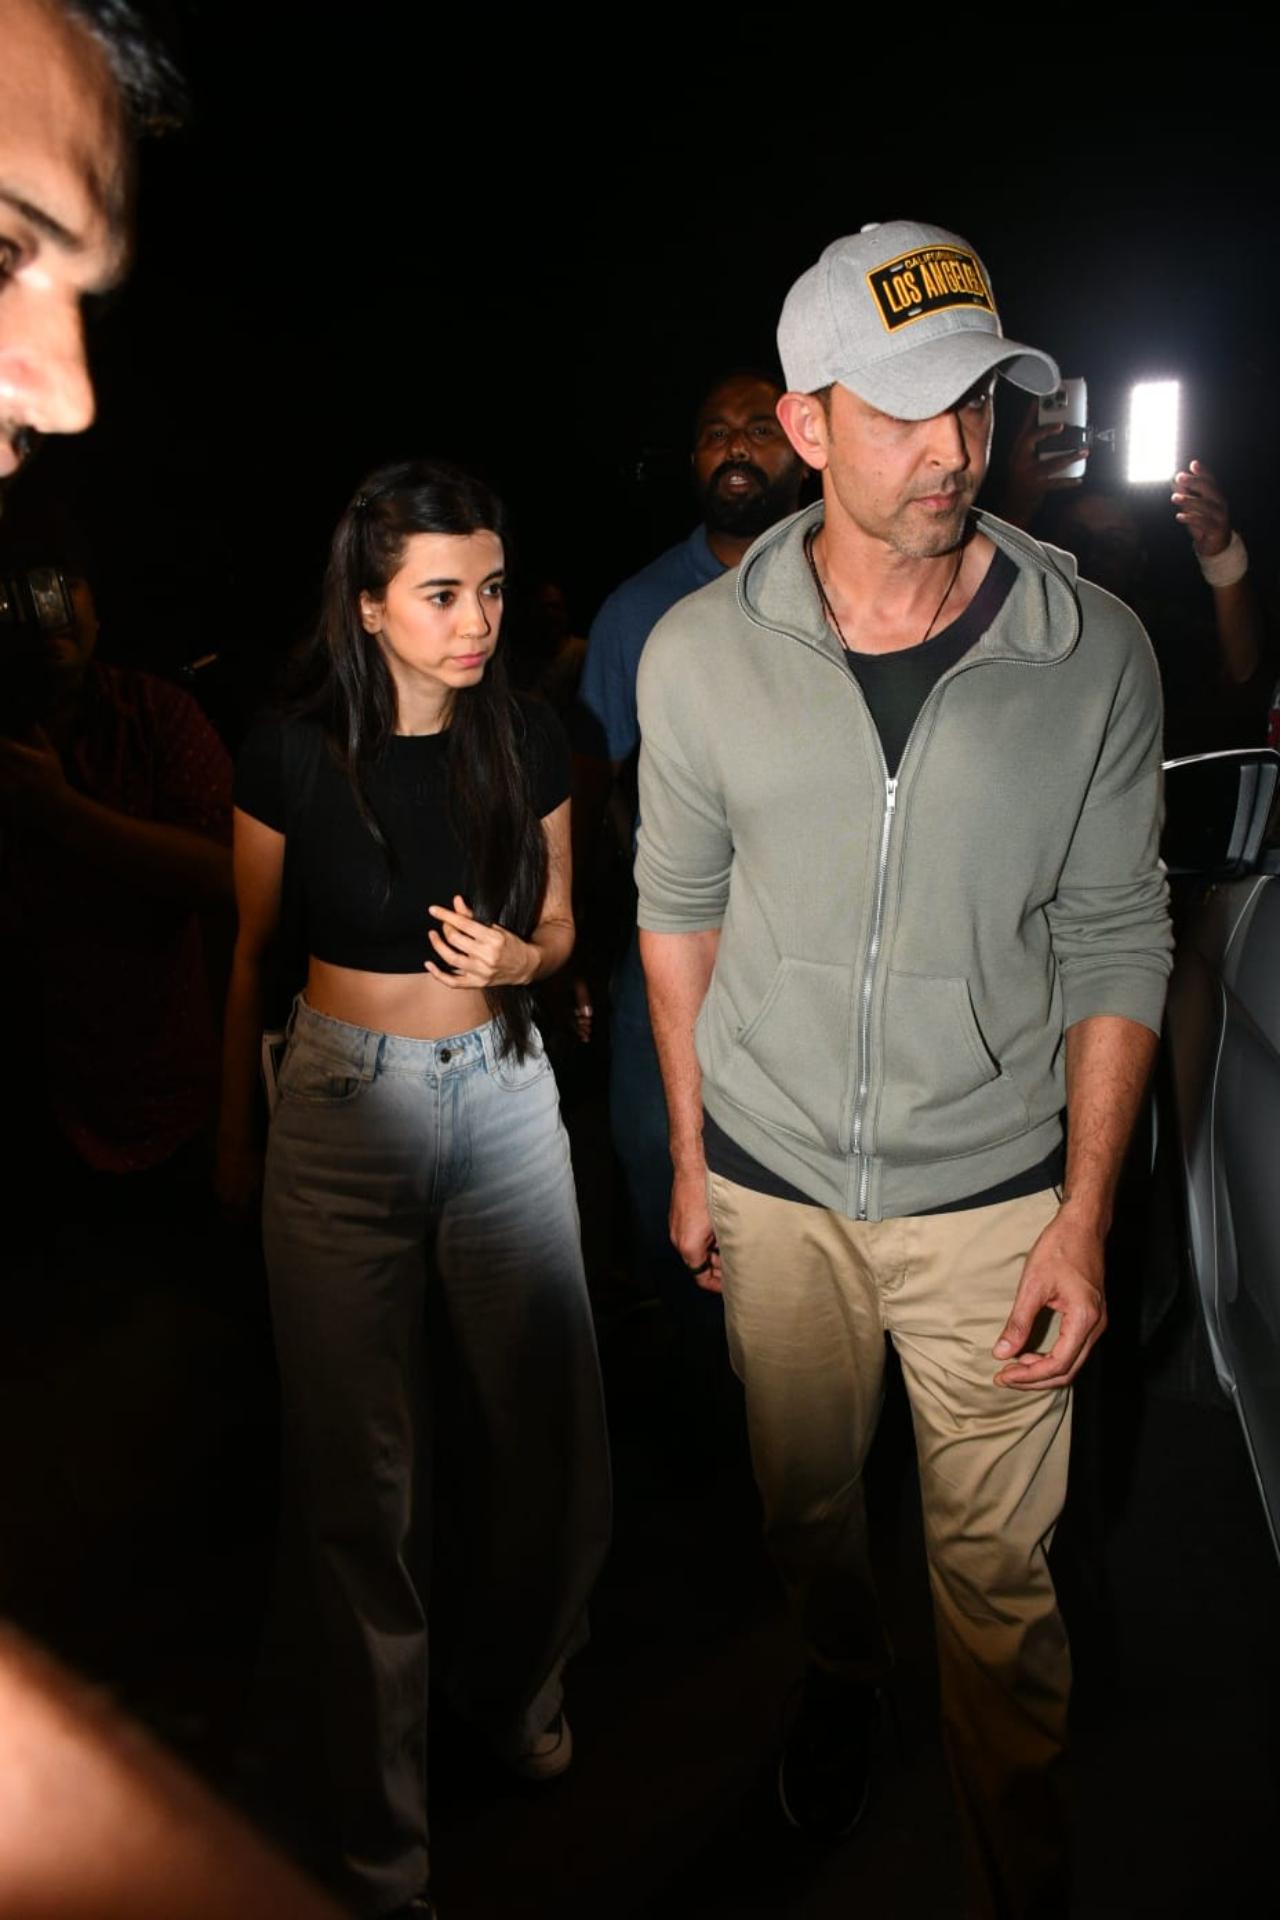 Hrithik Roshan, Saba Azad spotted at movie night with his younger son Hridhaan pic